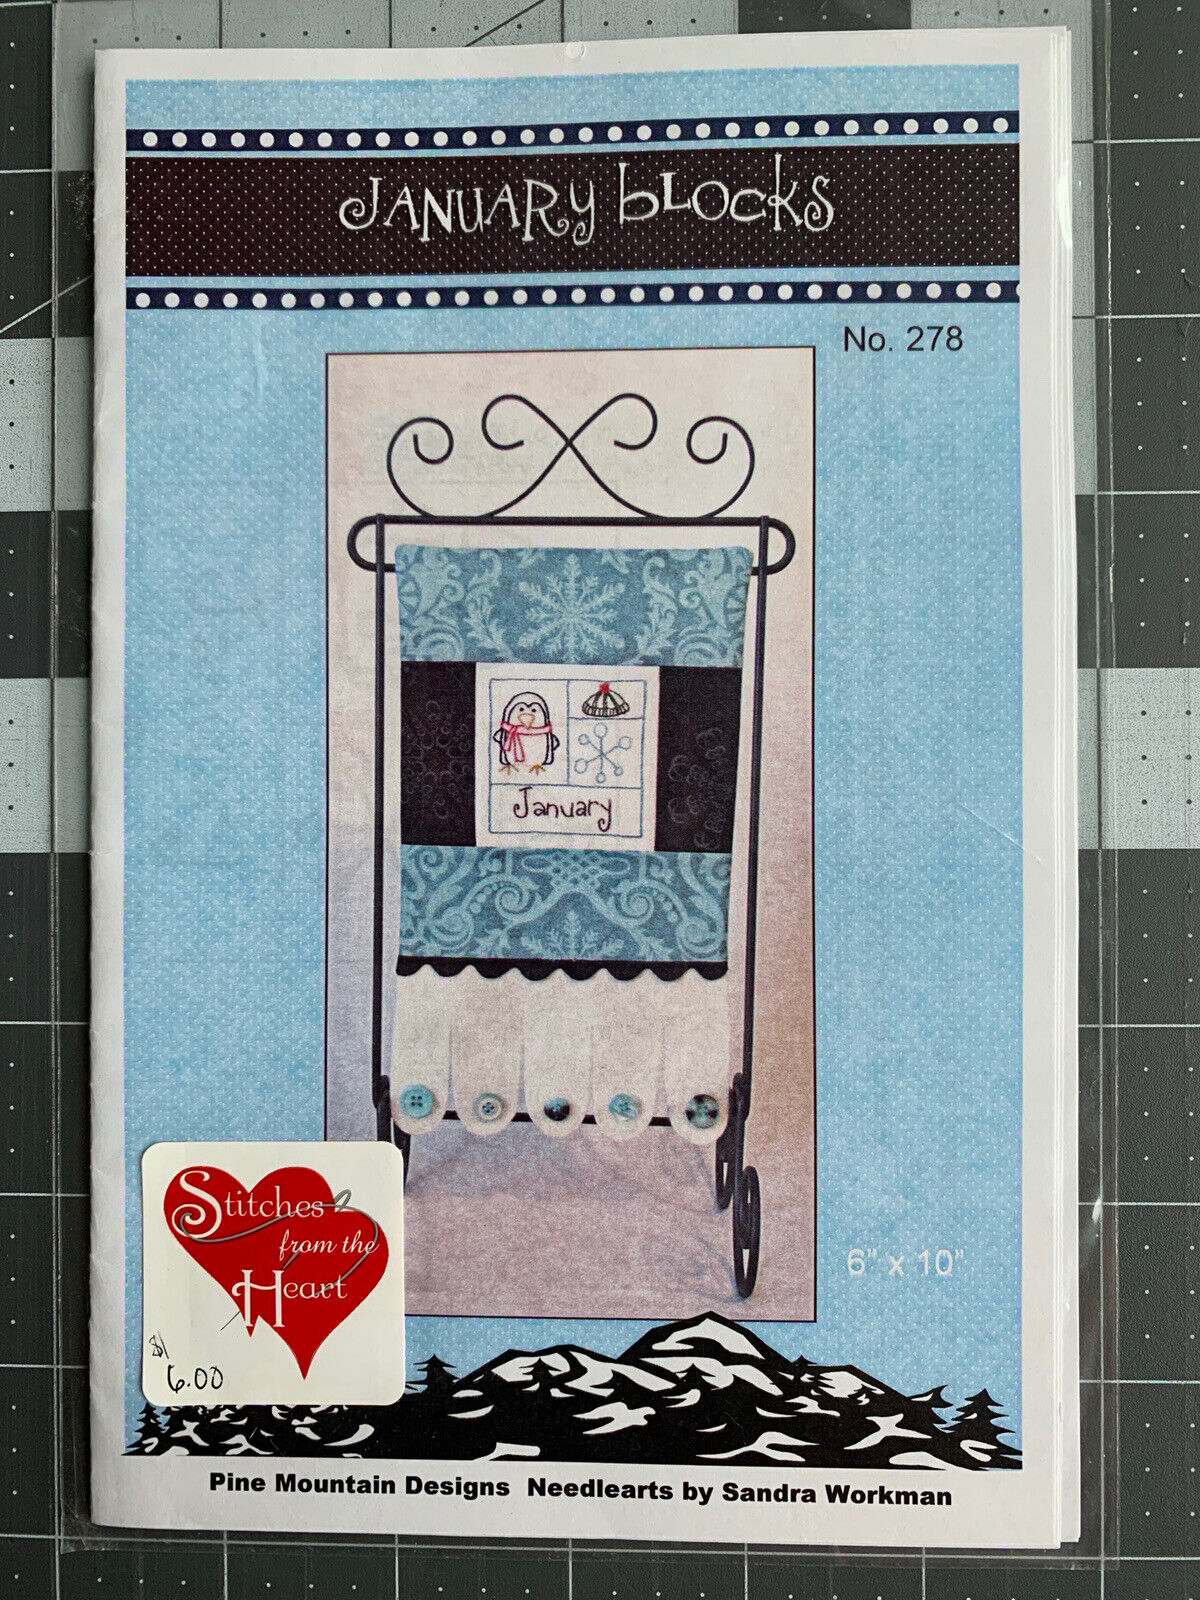 “january Blocks” Embroidery Pattern By Pine Mountain Designs